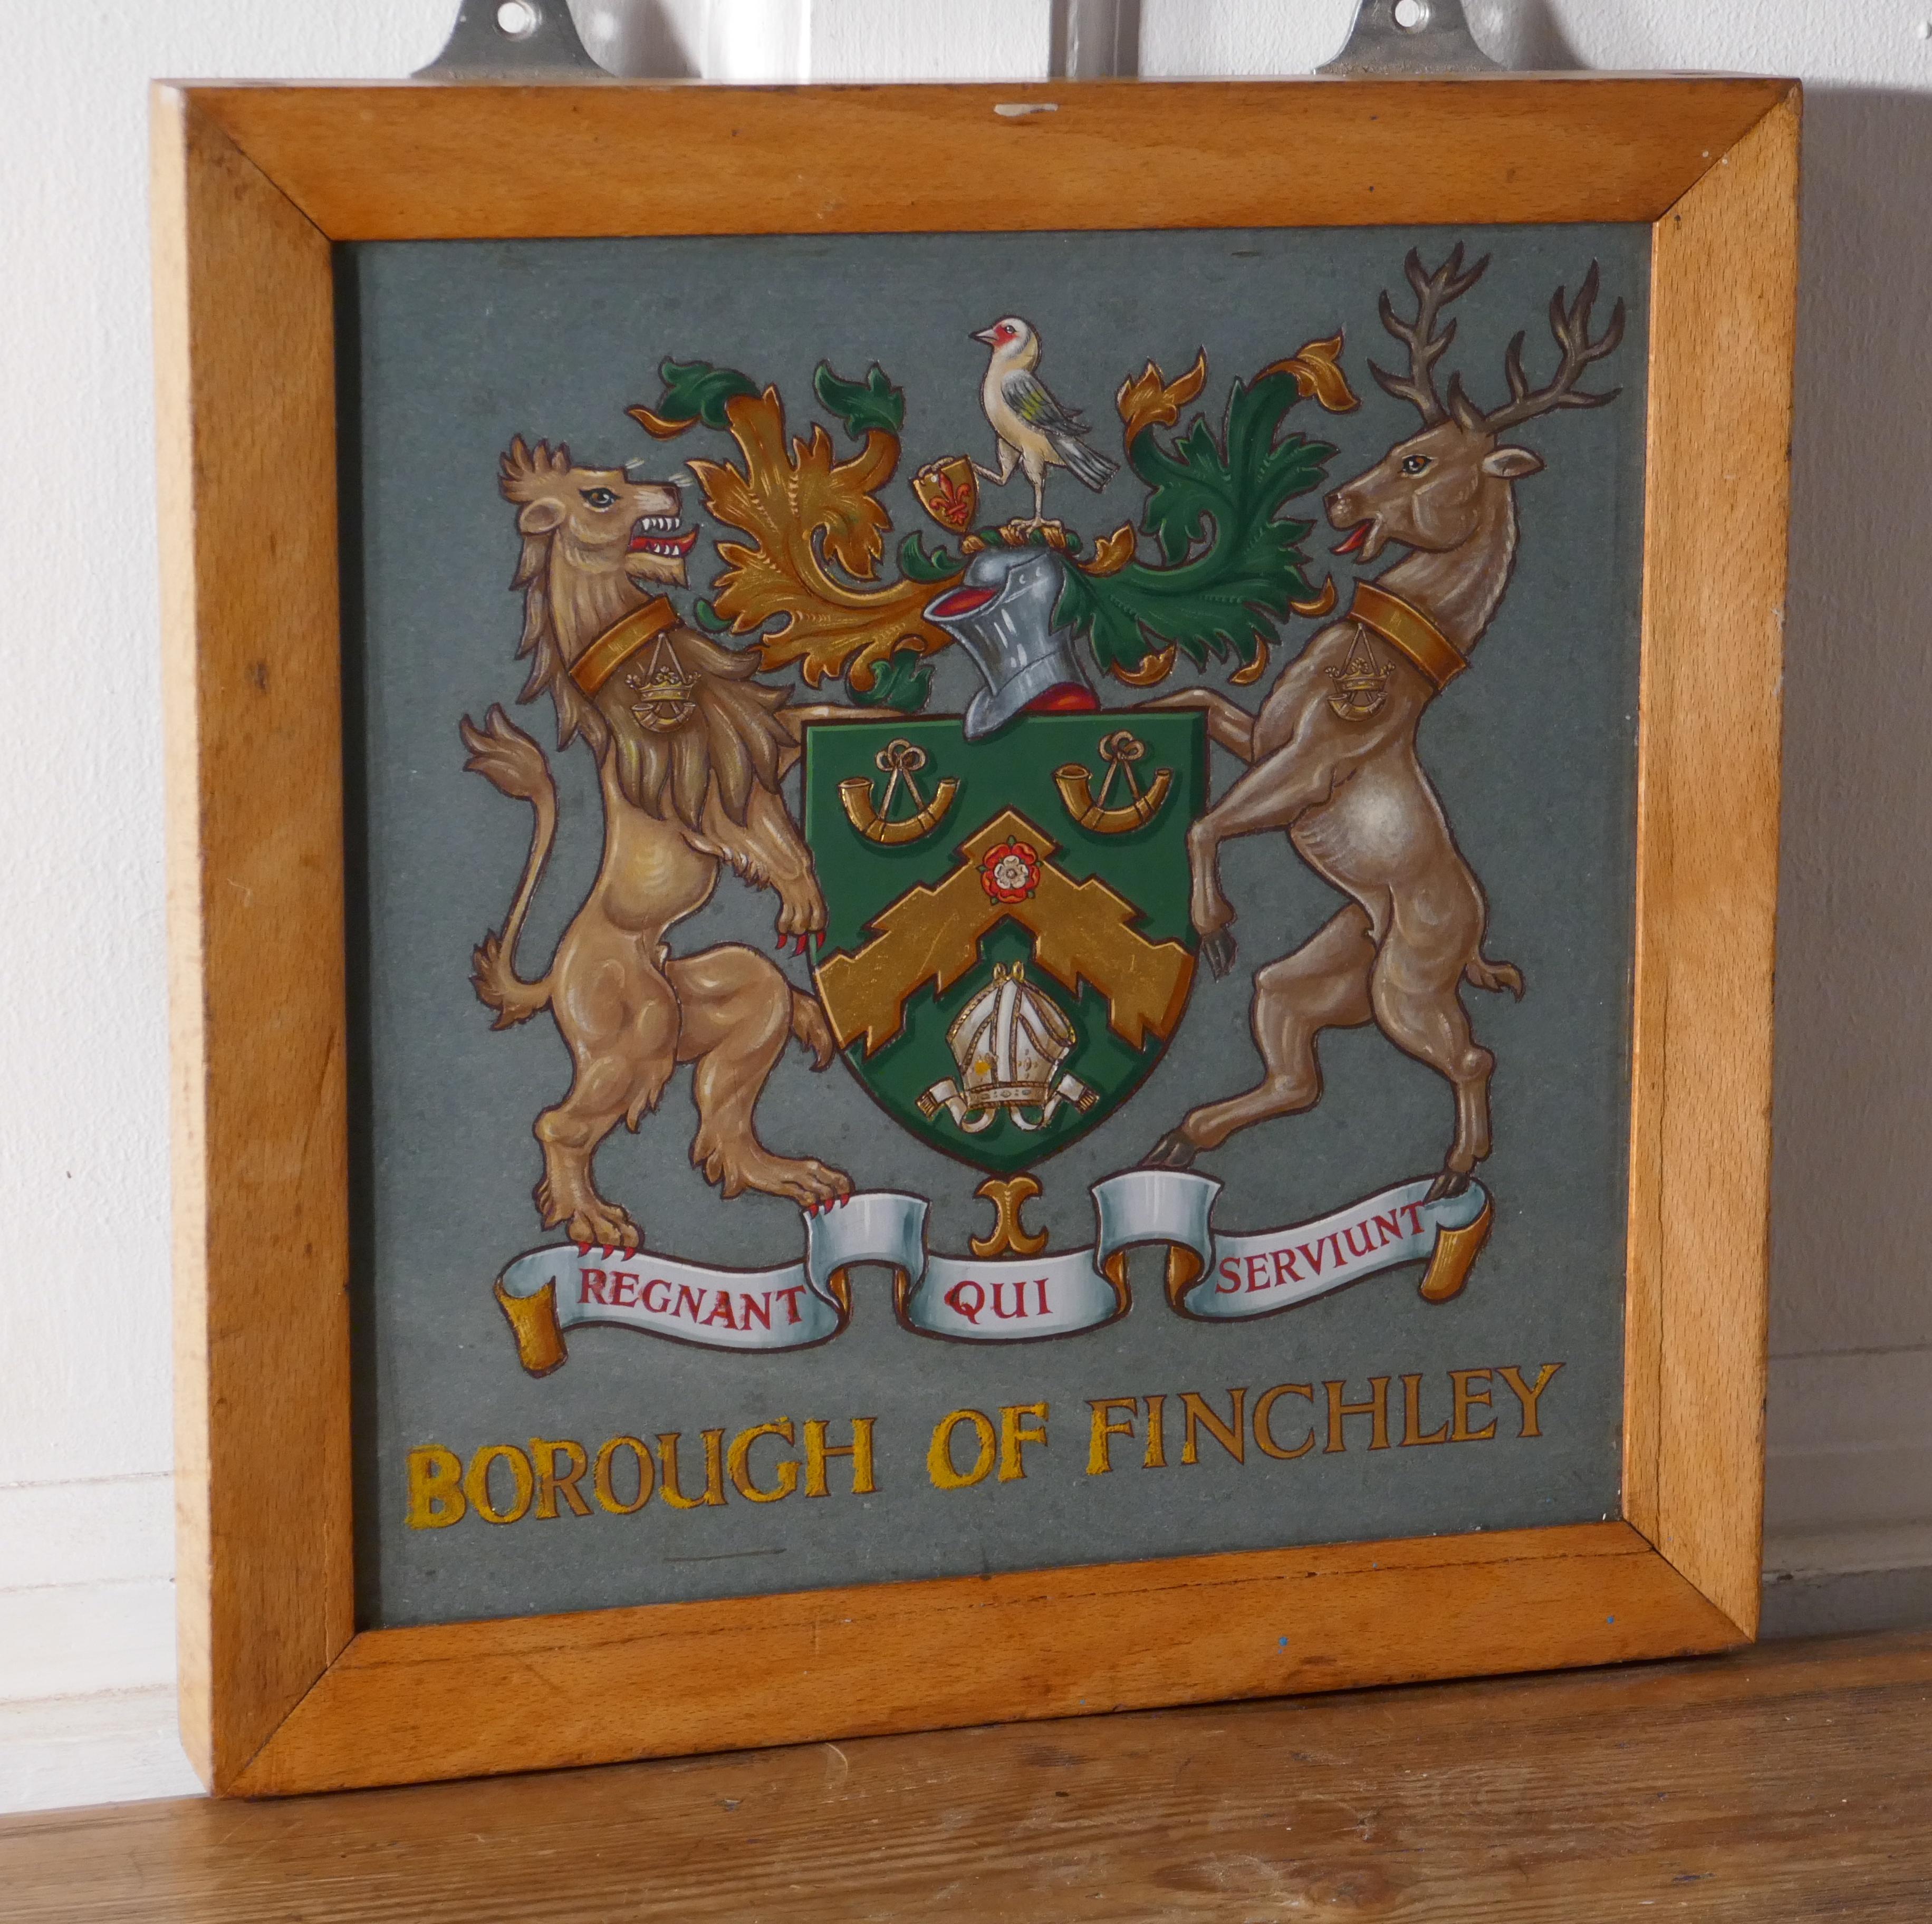 Heraldic Crest Framed & Painted on Slate from Borough of Finchley, Coat of Arms In Good Condition For Sale In Chillerton, Isle of Wight